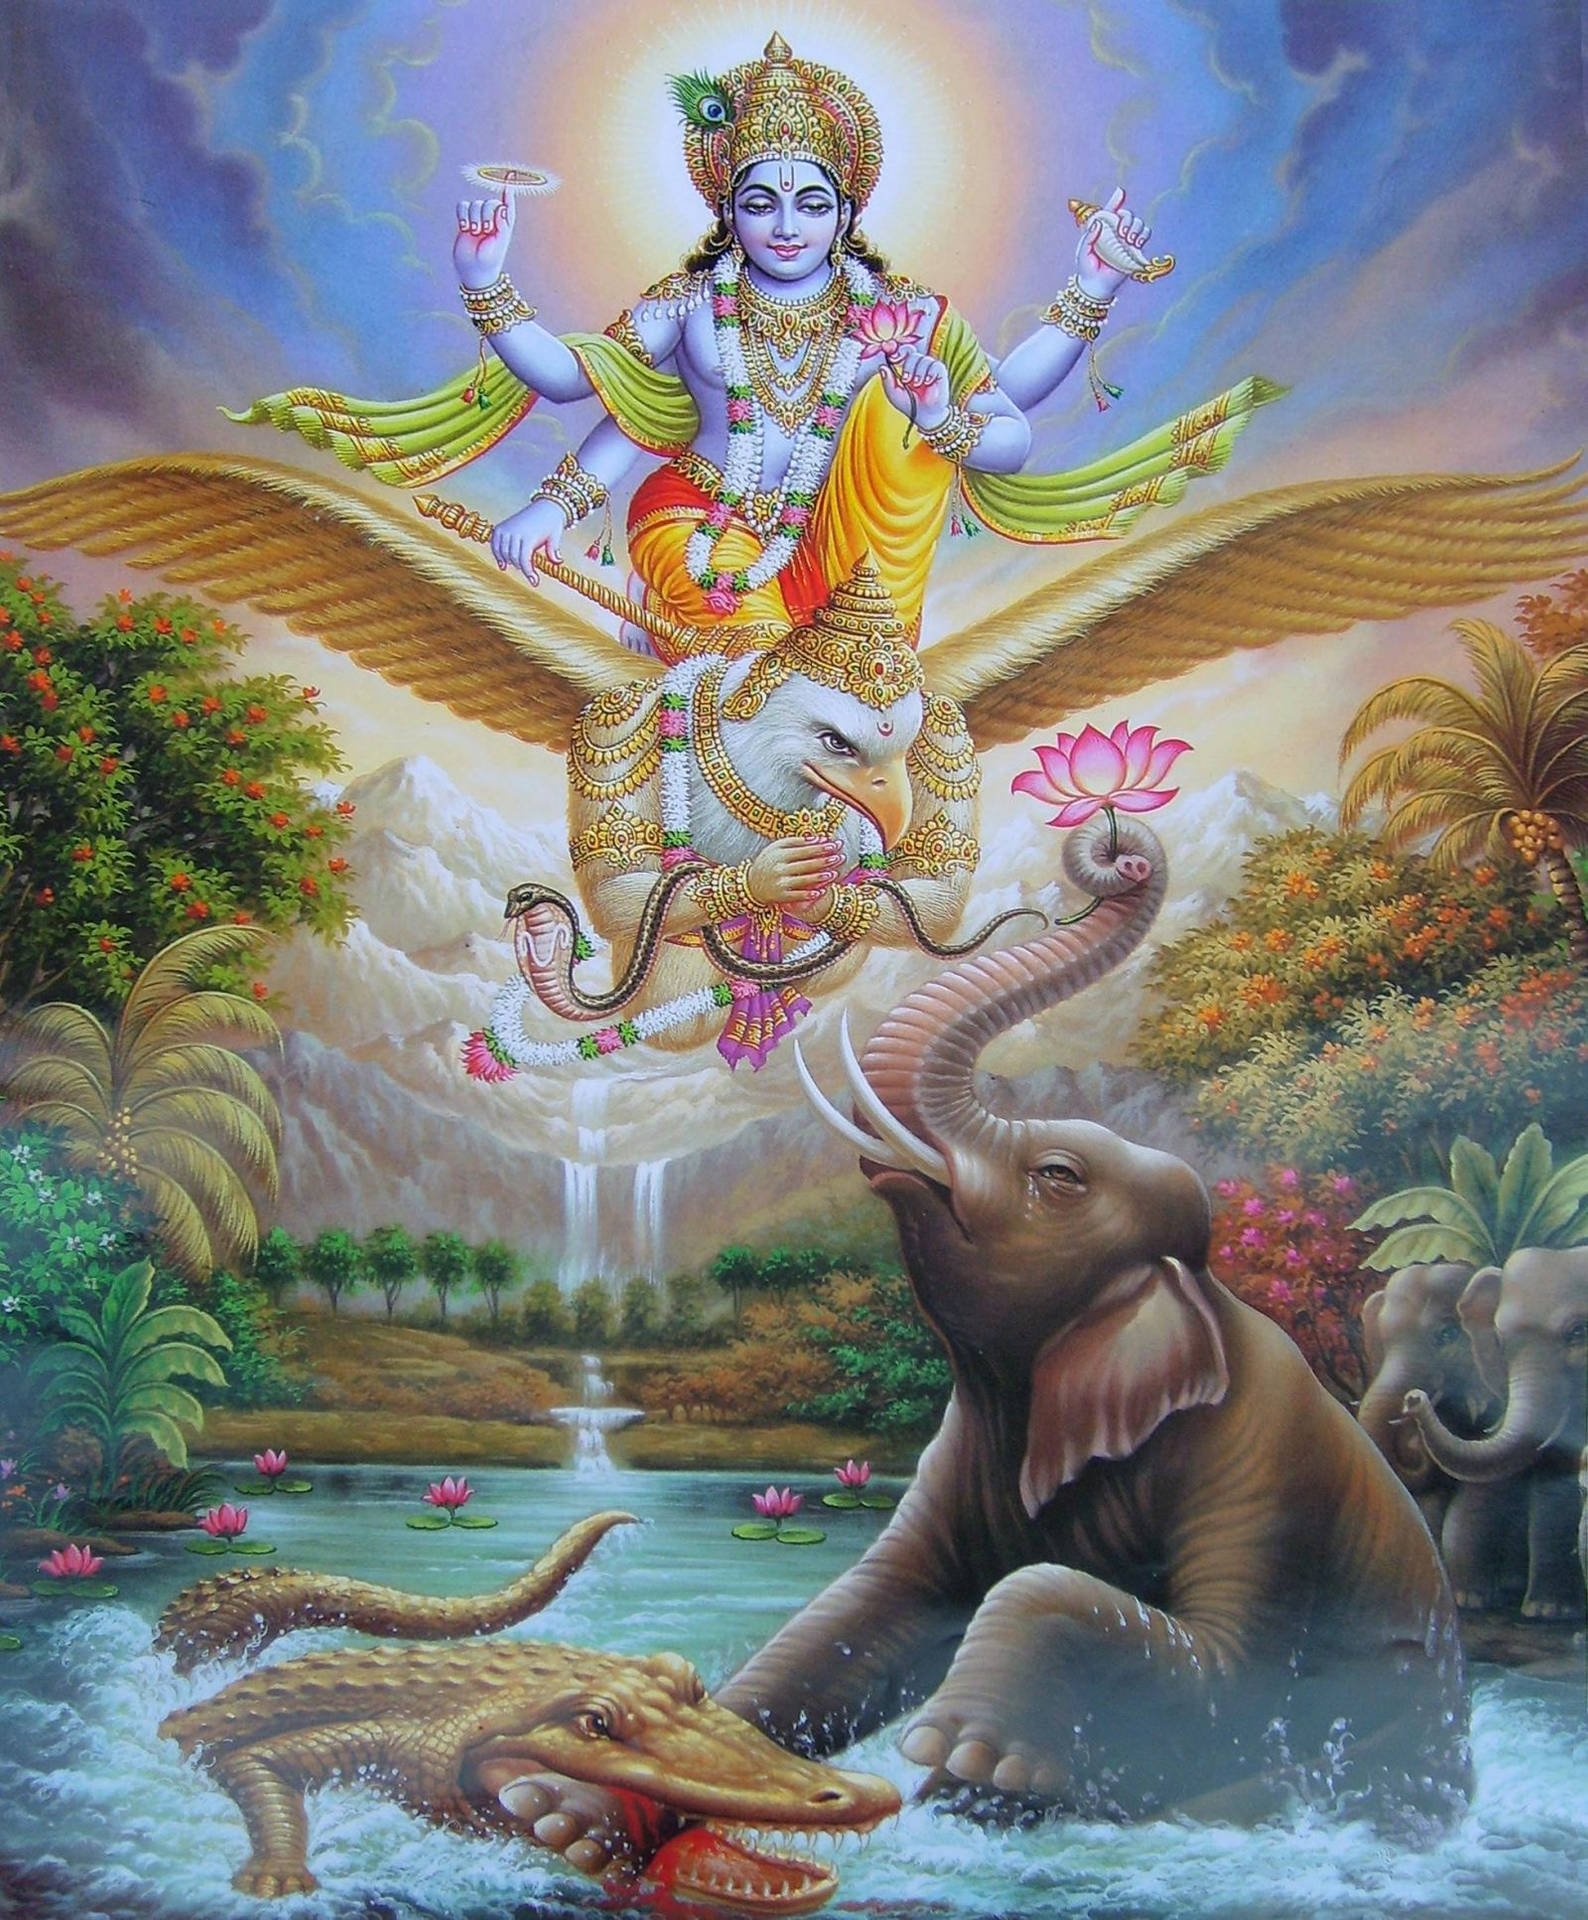 Divine Blessings: Lord Vishnu Receiving Flower Offering From Elephant Background